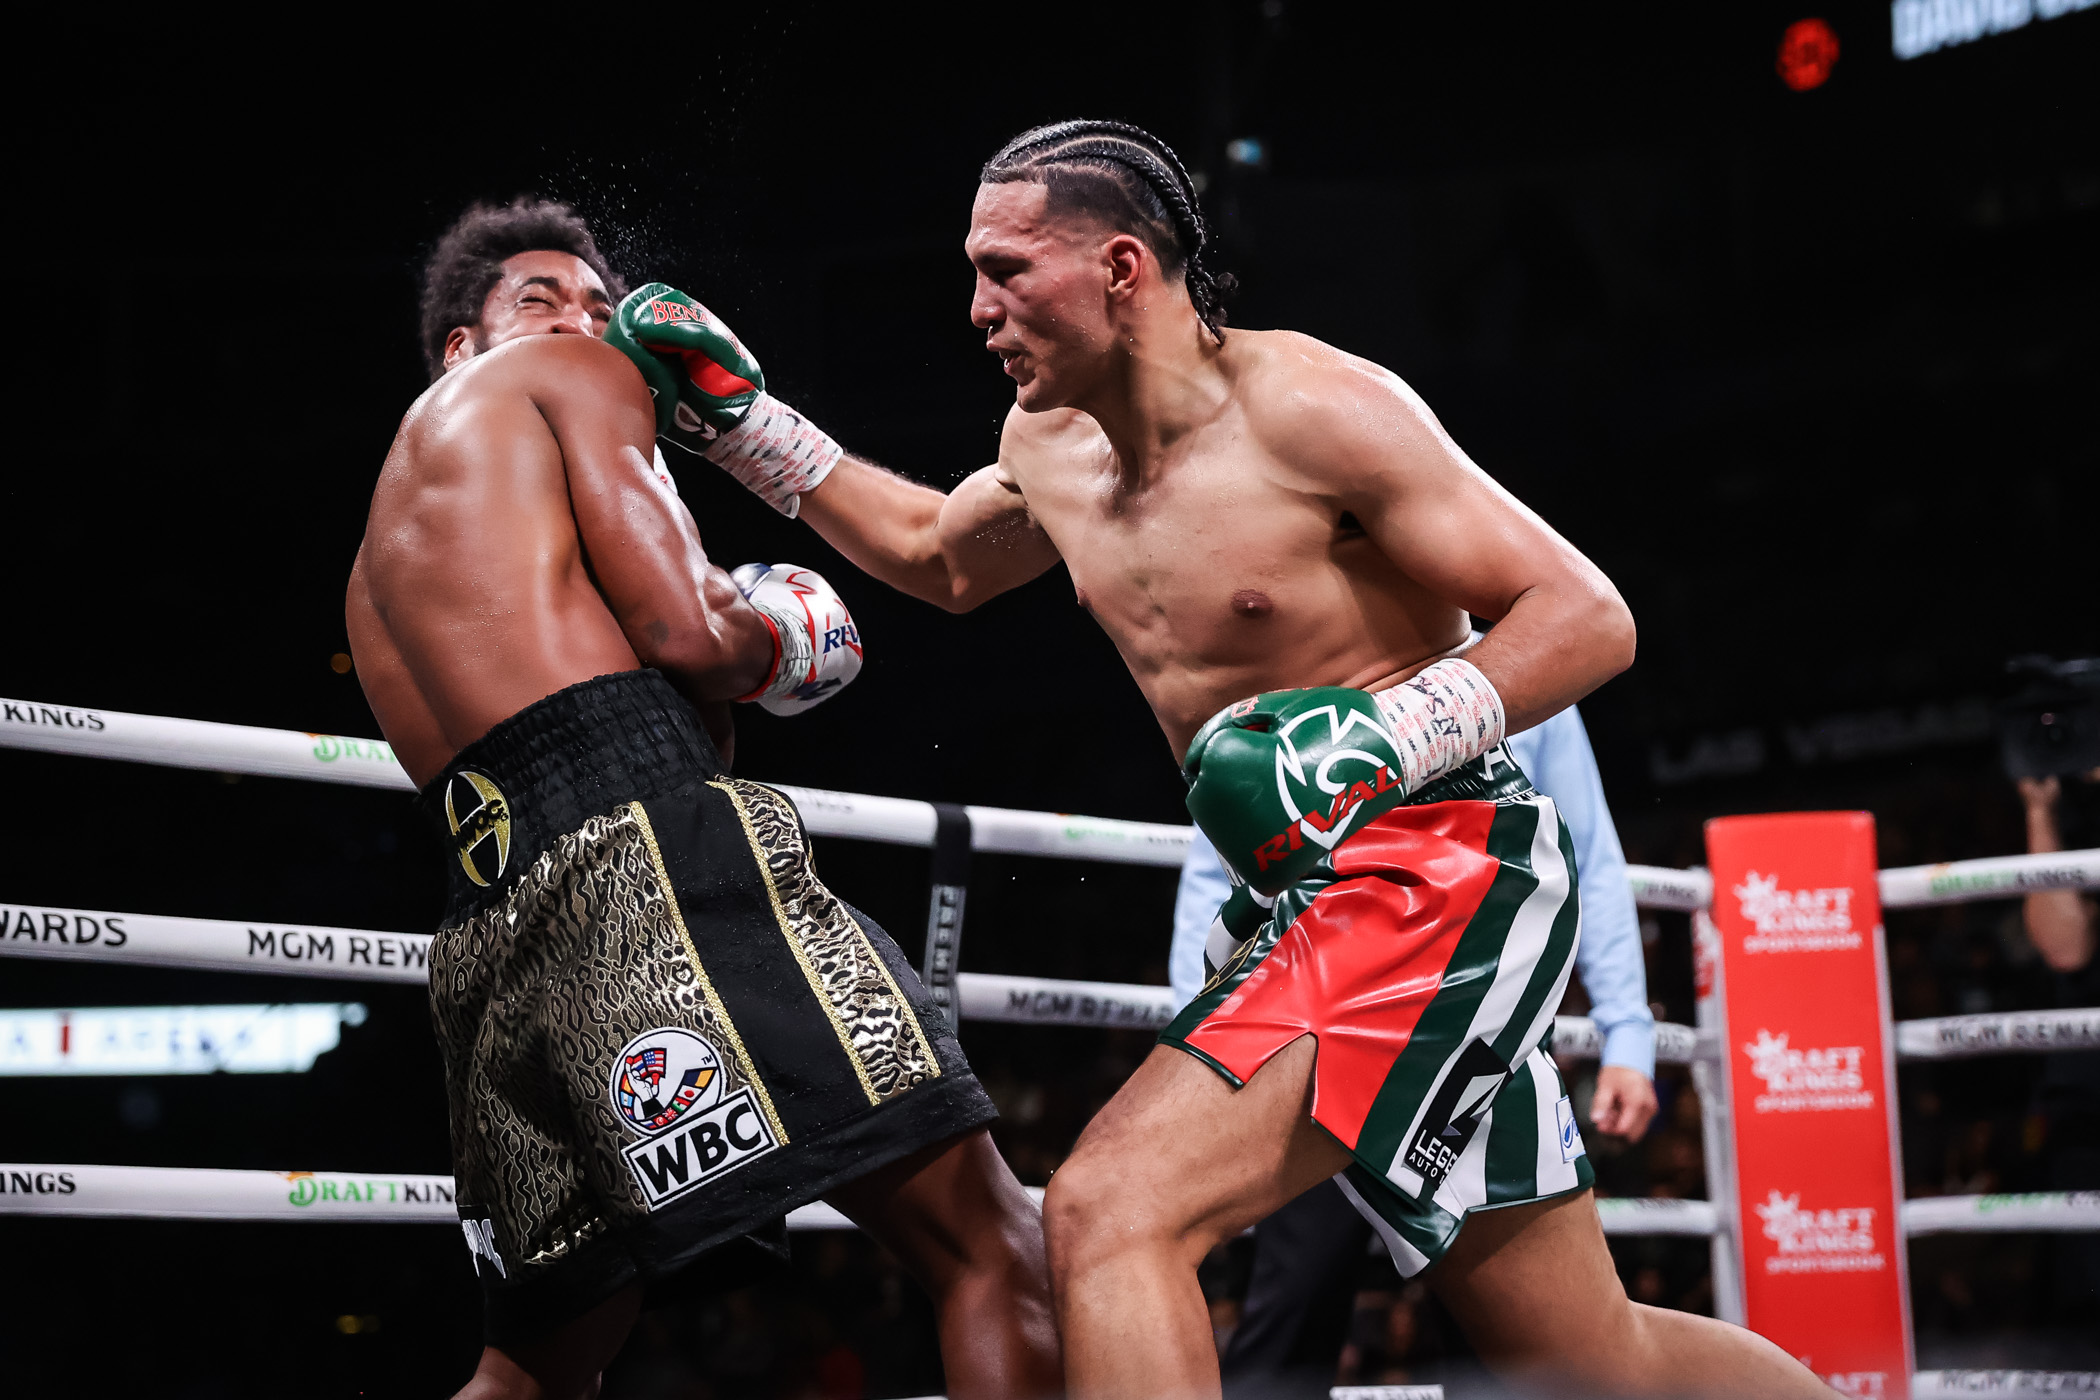 Benavidez stops Andrade after six rounds, calls for fight with super  middleweight champ Canelo